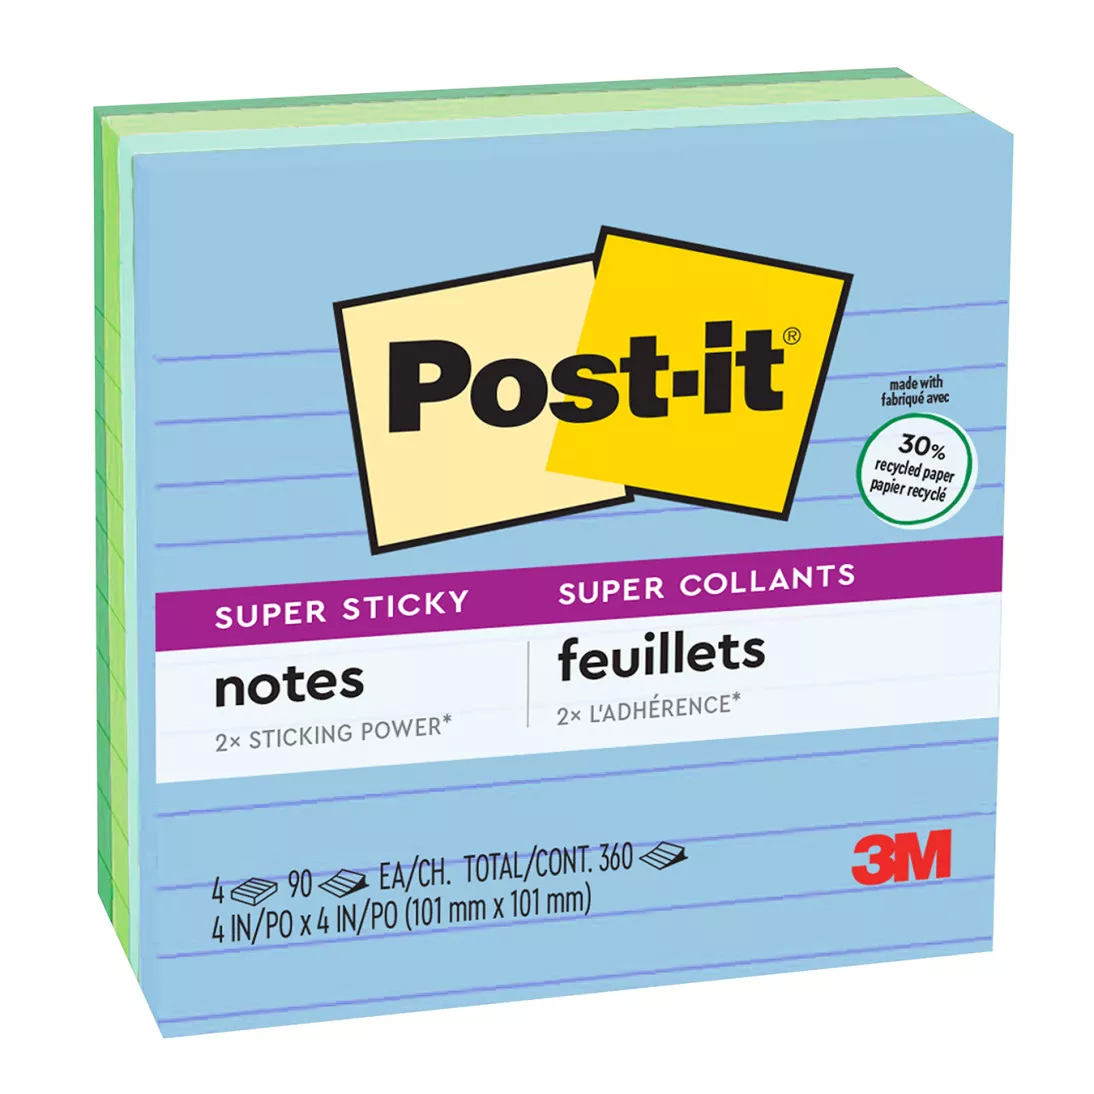 Post-it® Super Sticky Recycled Notes 675-4SST, 4 in x 4 in (101 mm x 101
mm) Bora Bora Collection, Lined, 4 Pads/Pk